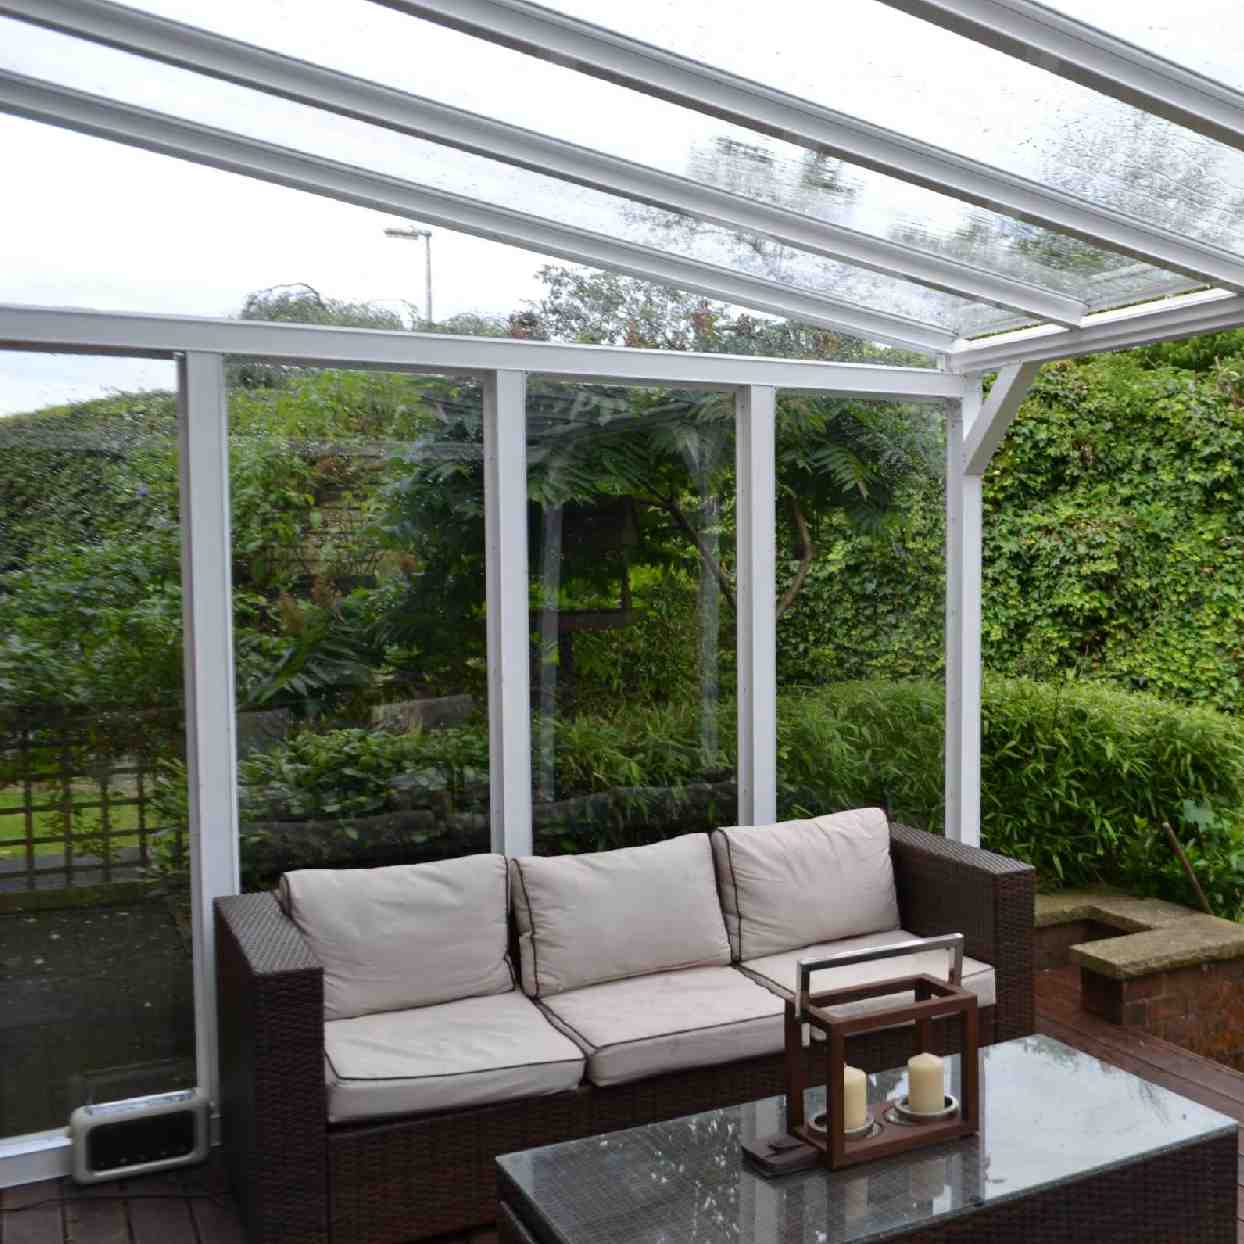 Buy Omega Verandah White with 16mm Polycarbonate Glazing - 7.4m (W) x 1.5m (P), (4) Supporting Posts online today